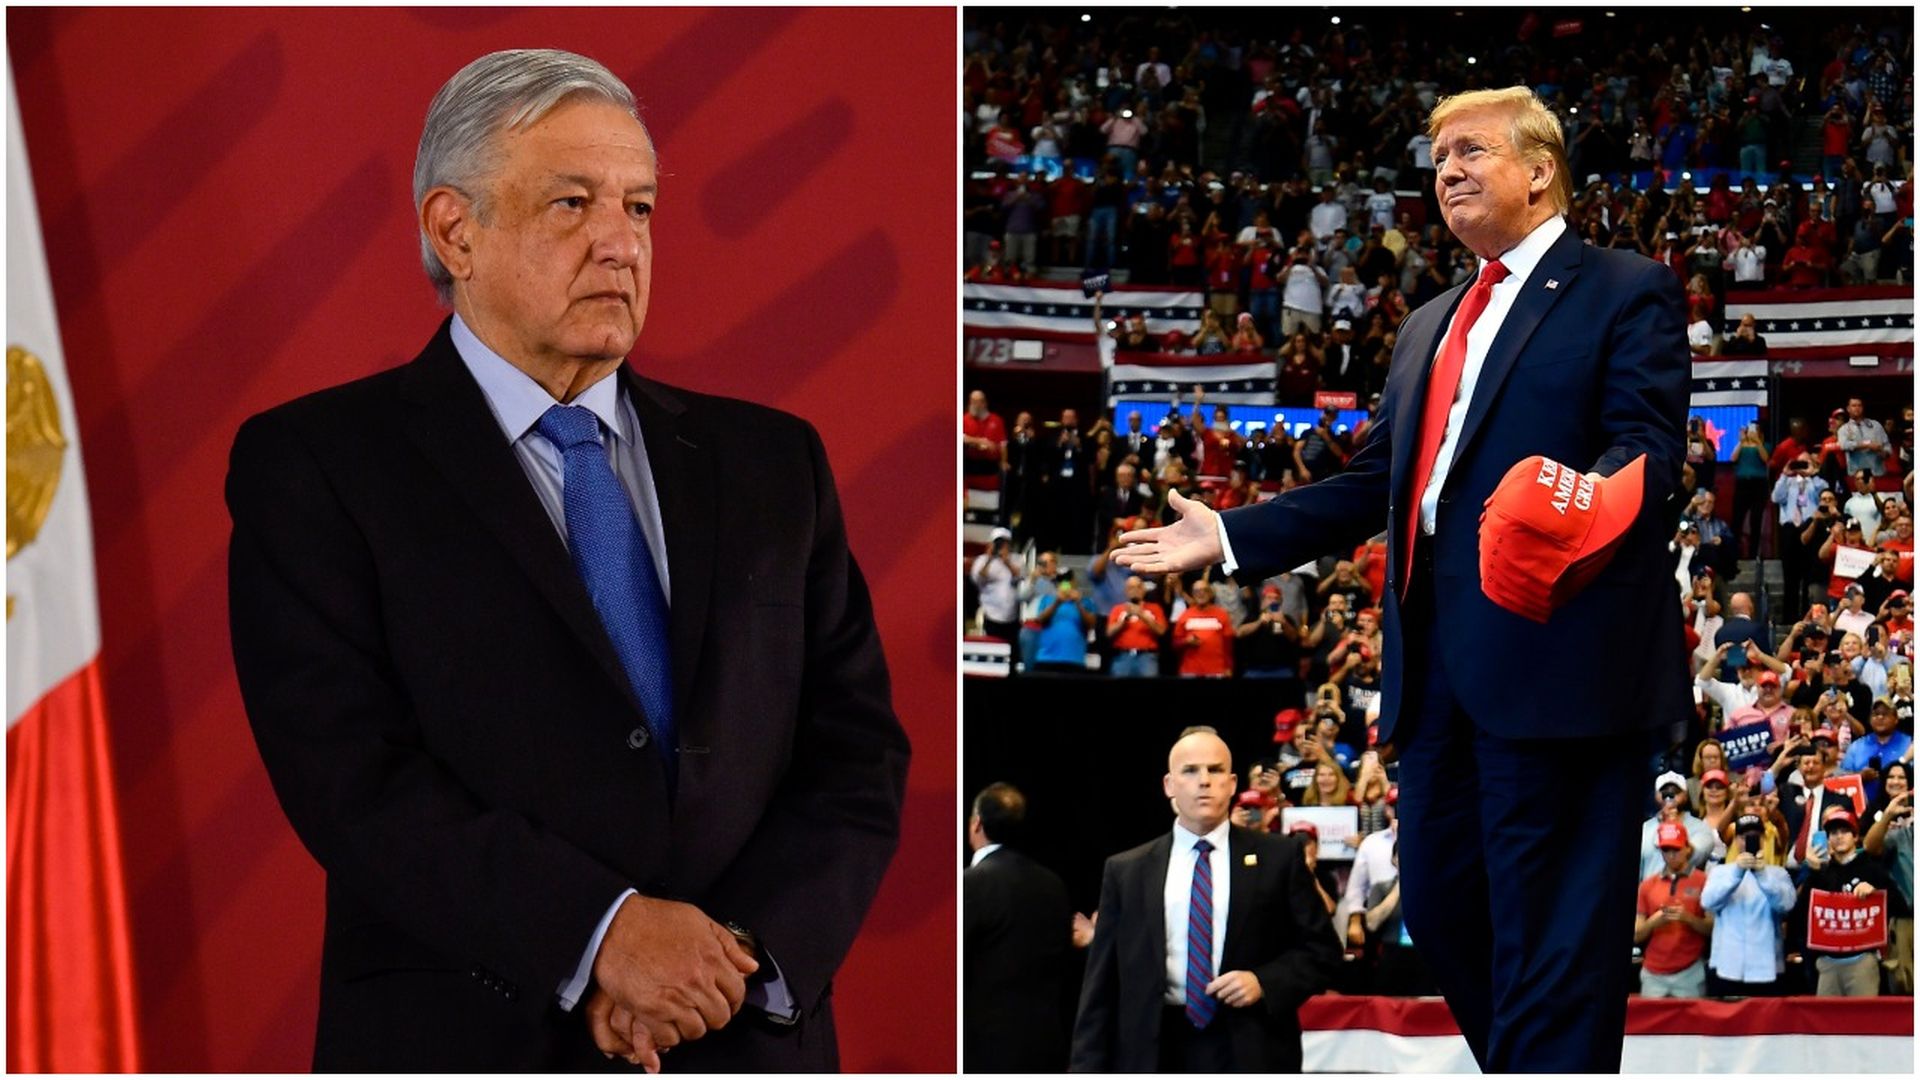 This image is a split screen of Mexico's president and Donald Trump